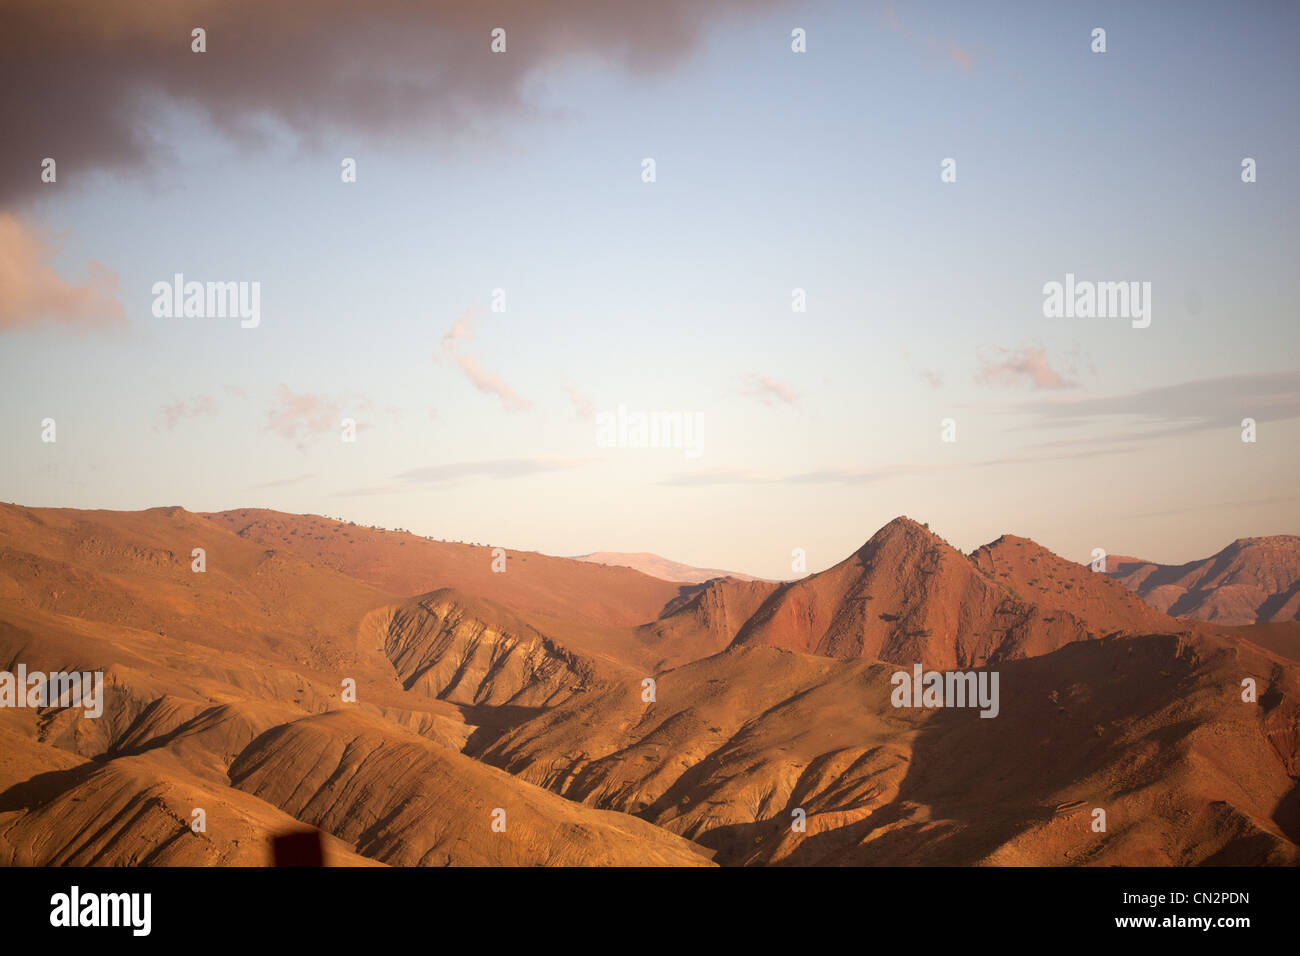 Mountain scenery, Morocco, North Africa Stock Photo